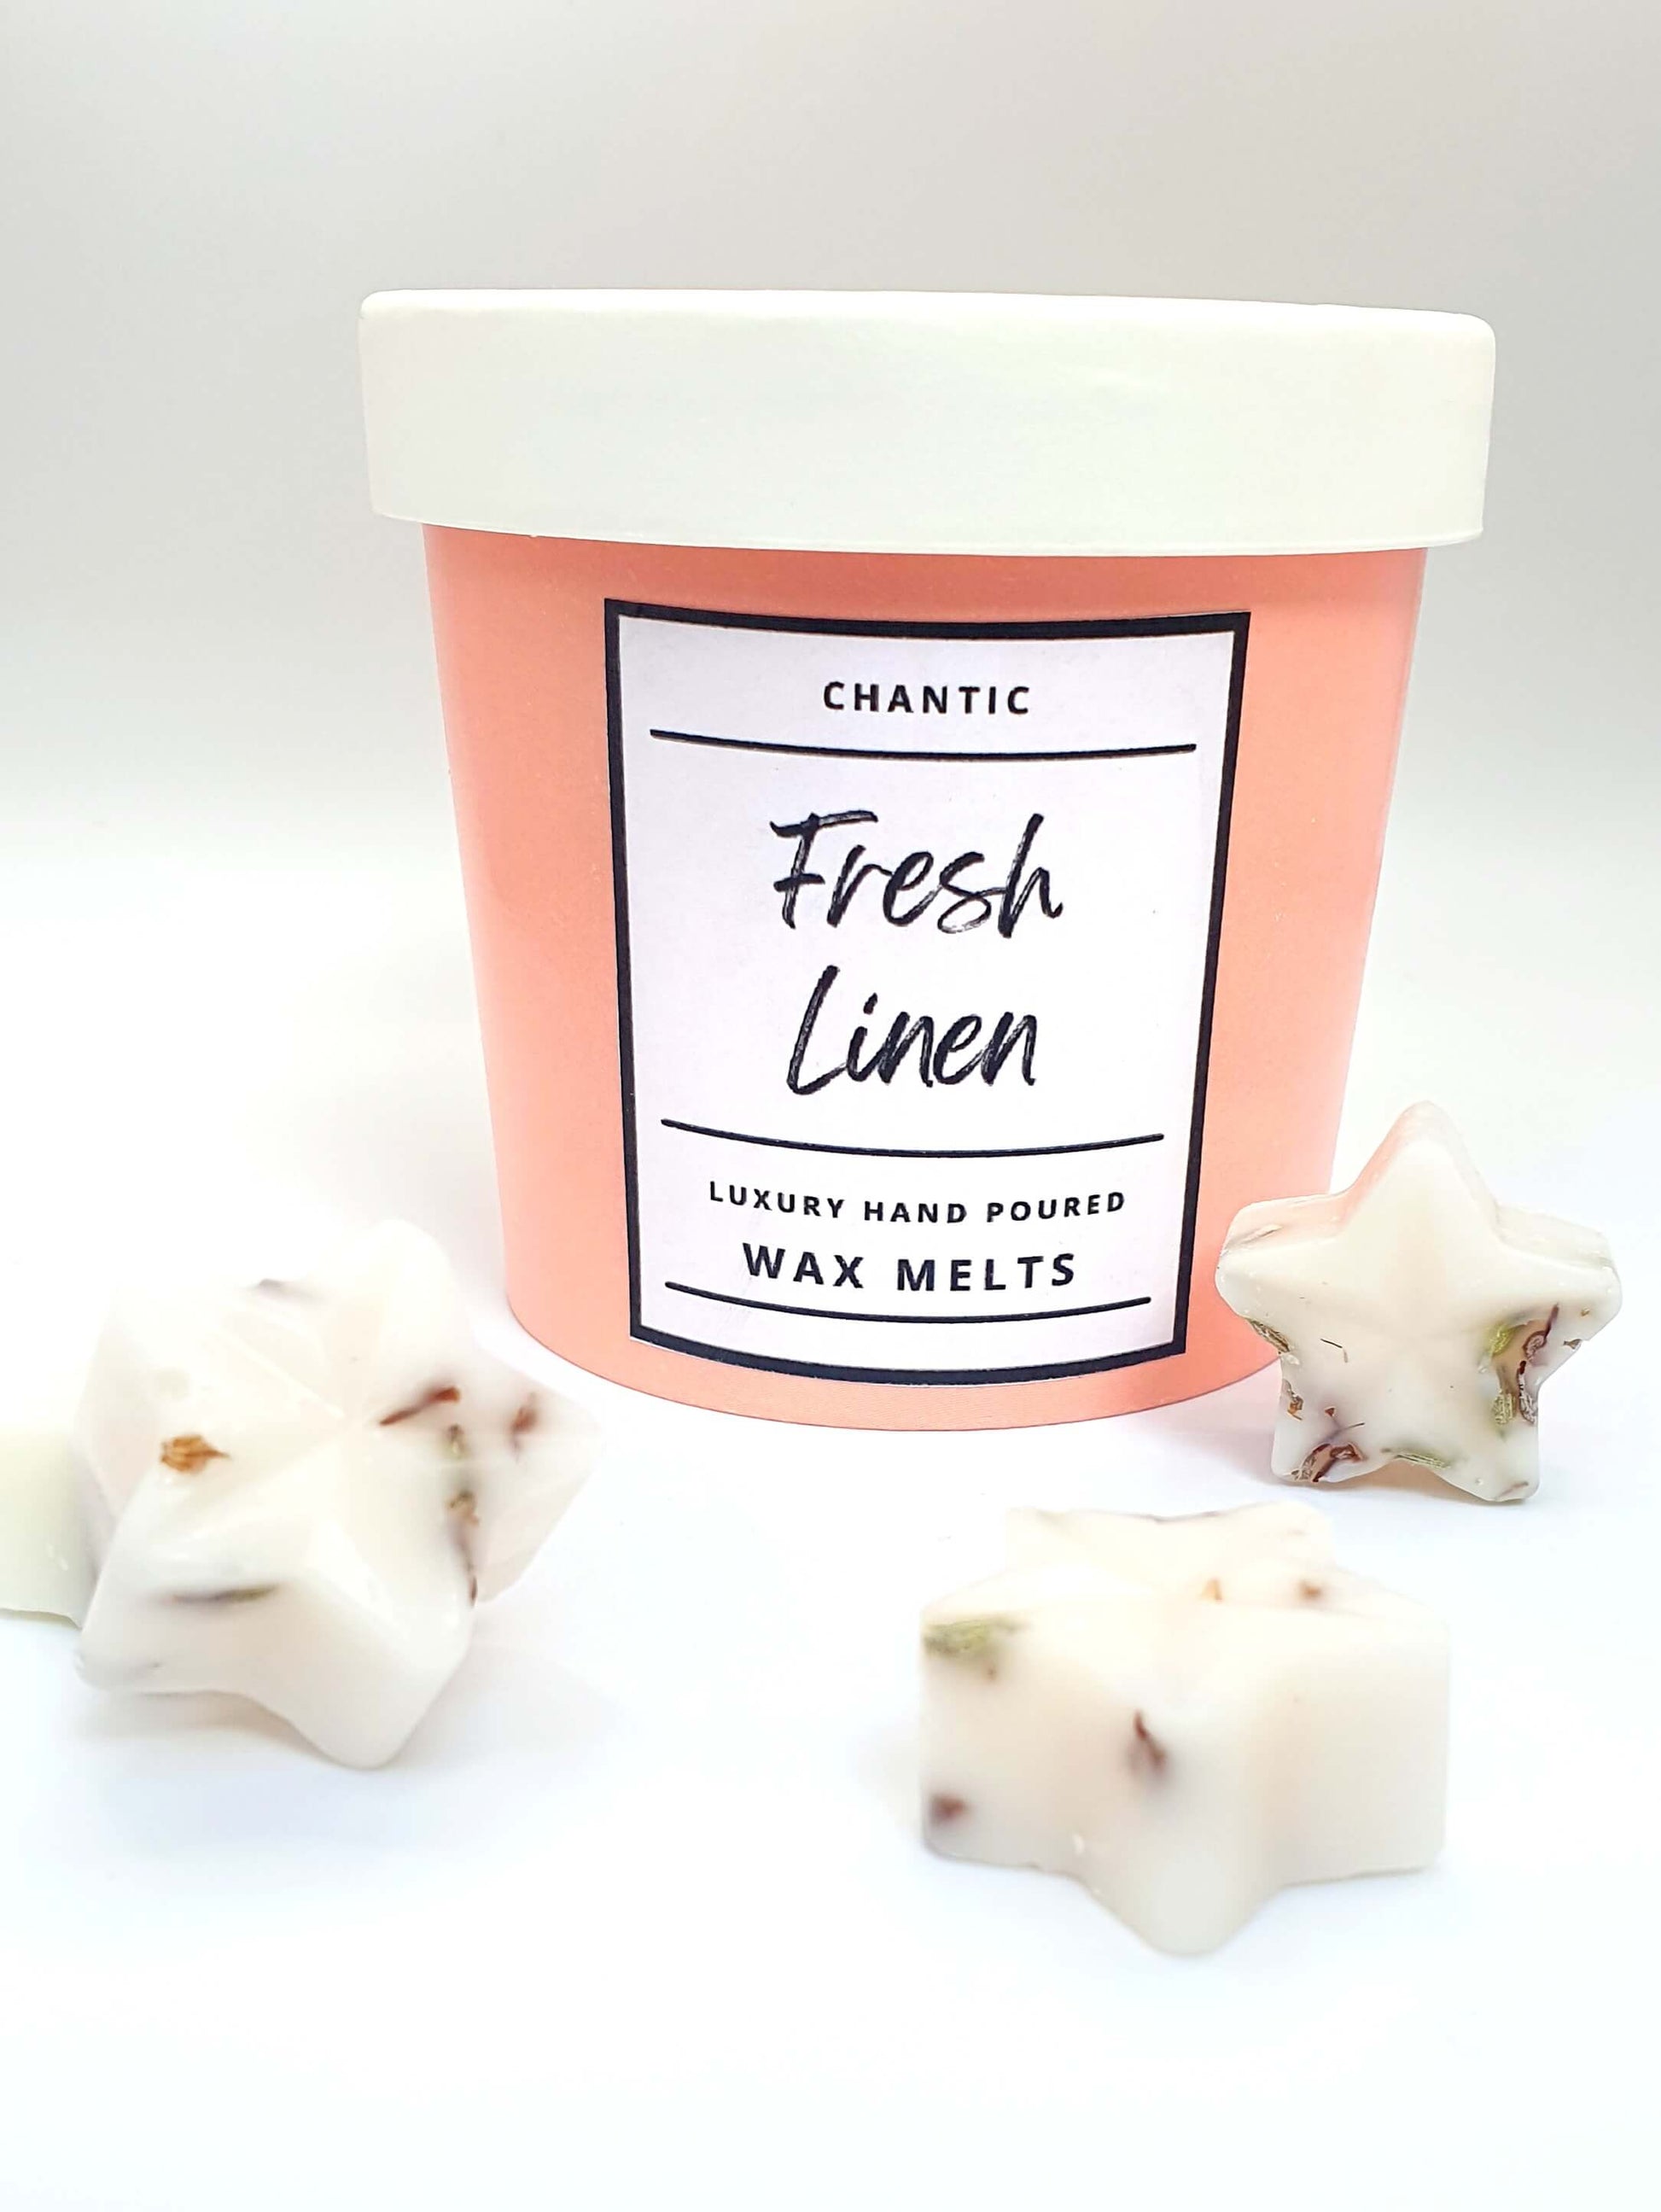 highly scented wax melts, waxandmelt, candles and wax melts